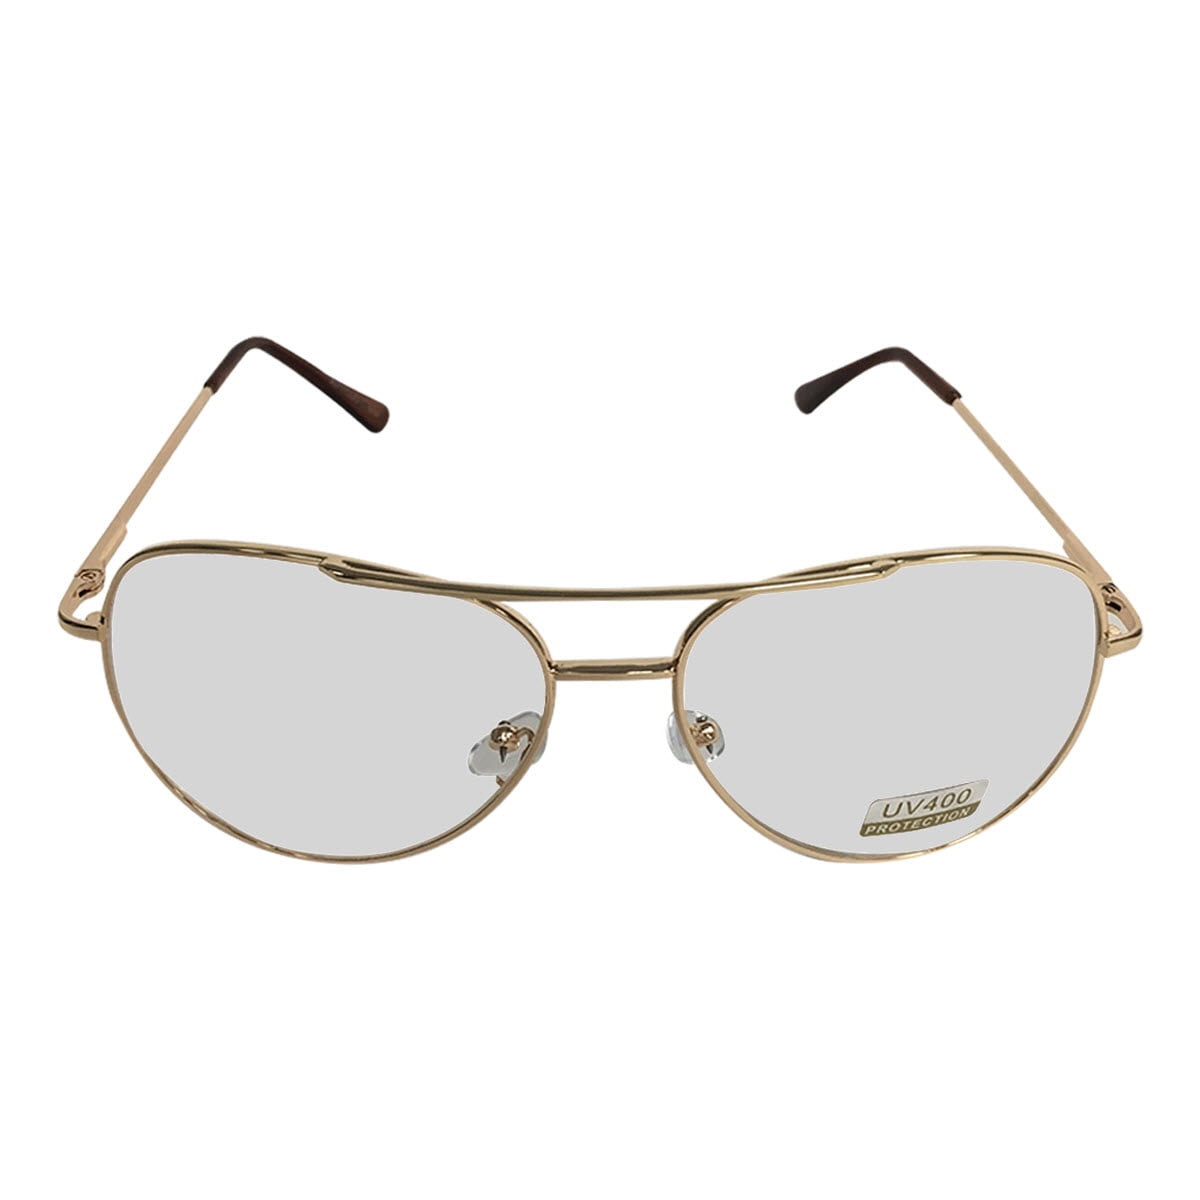 Silver Frames With Clear Lens Aviator Glasses Napoleon Dynamite Bill Lumbergh